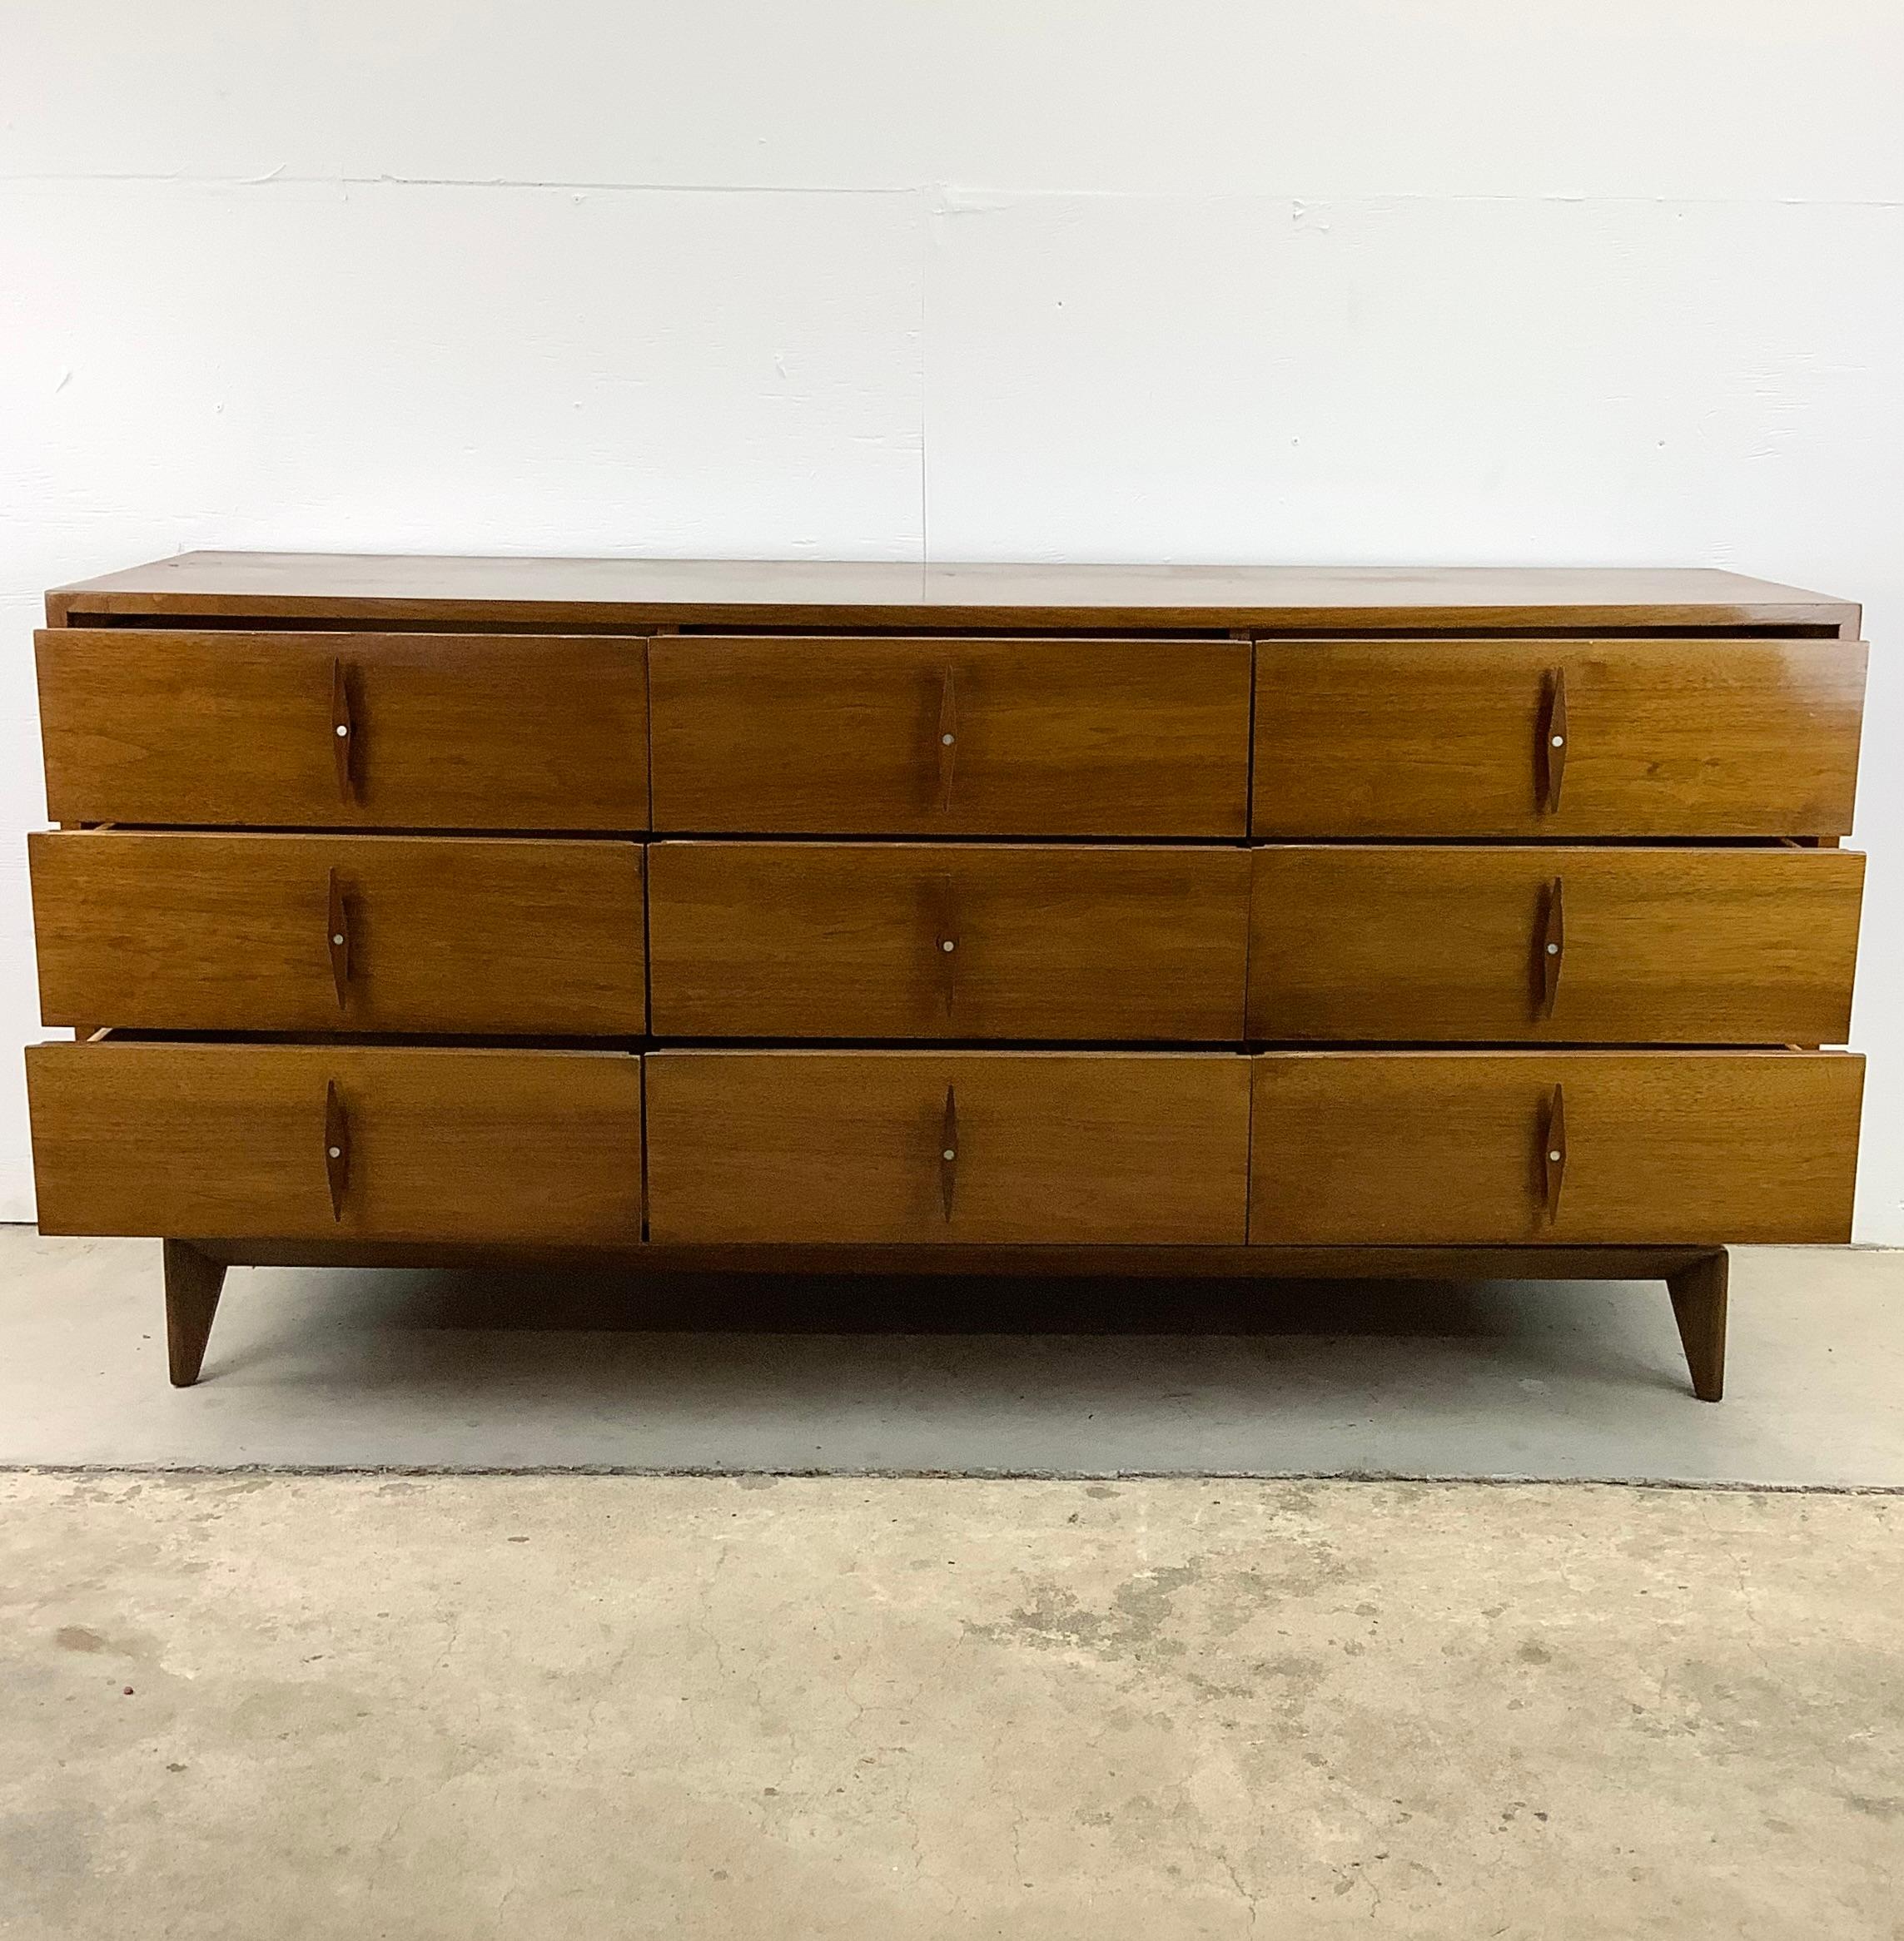 This Vintage American of Martinsville Lowboy dresser captures the essence of mid-century style while offering practical functionality for your home decor needs.

Manufactured with meticulous attention to detail, this nine drawer walnut dresser